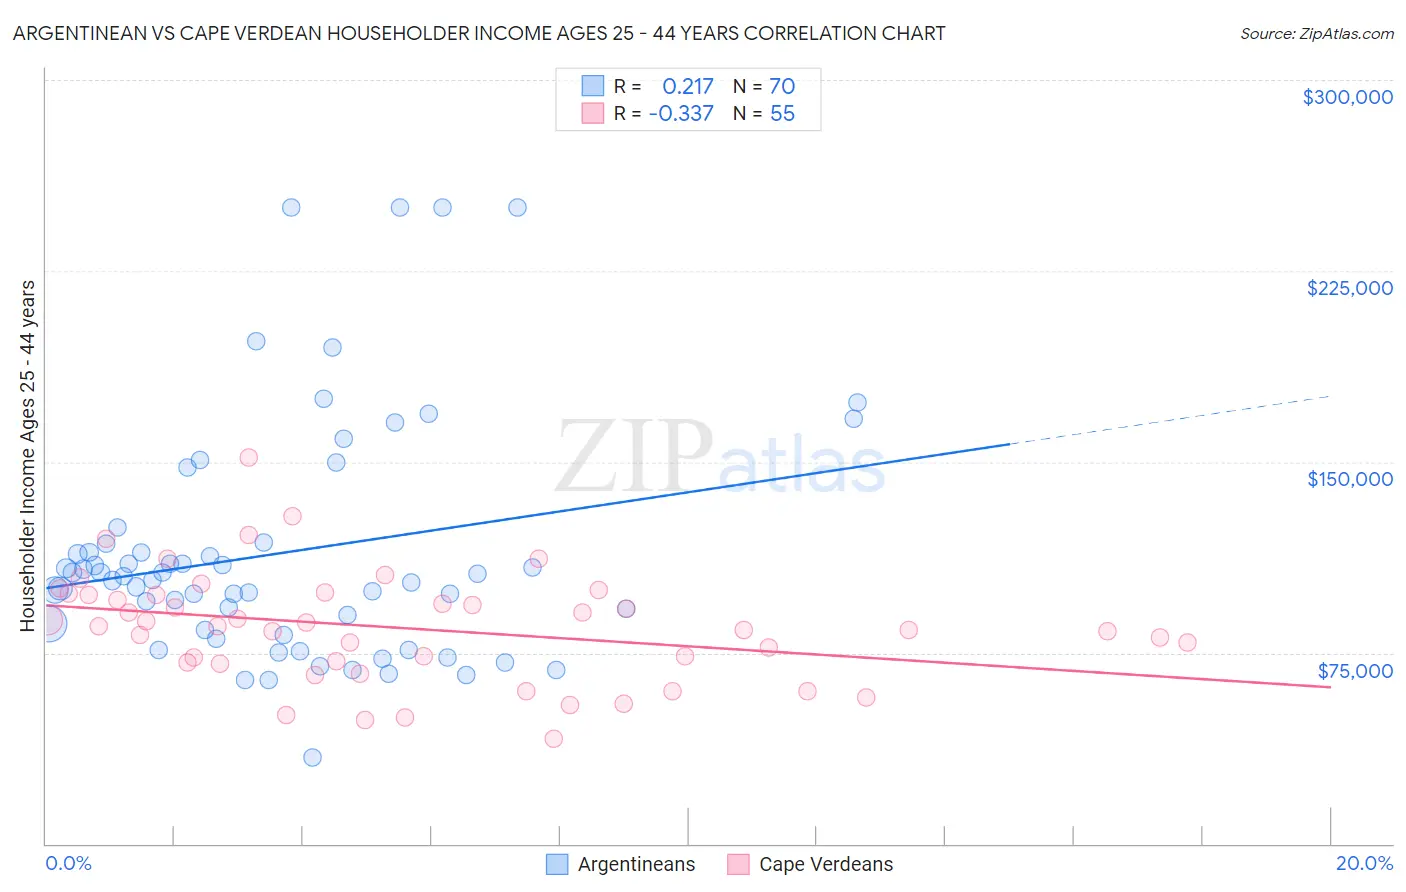 Argentinean vs Cape Verdean Householder Income Ages 25 - 44 years